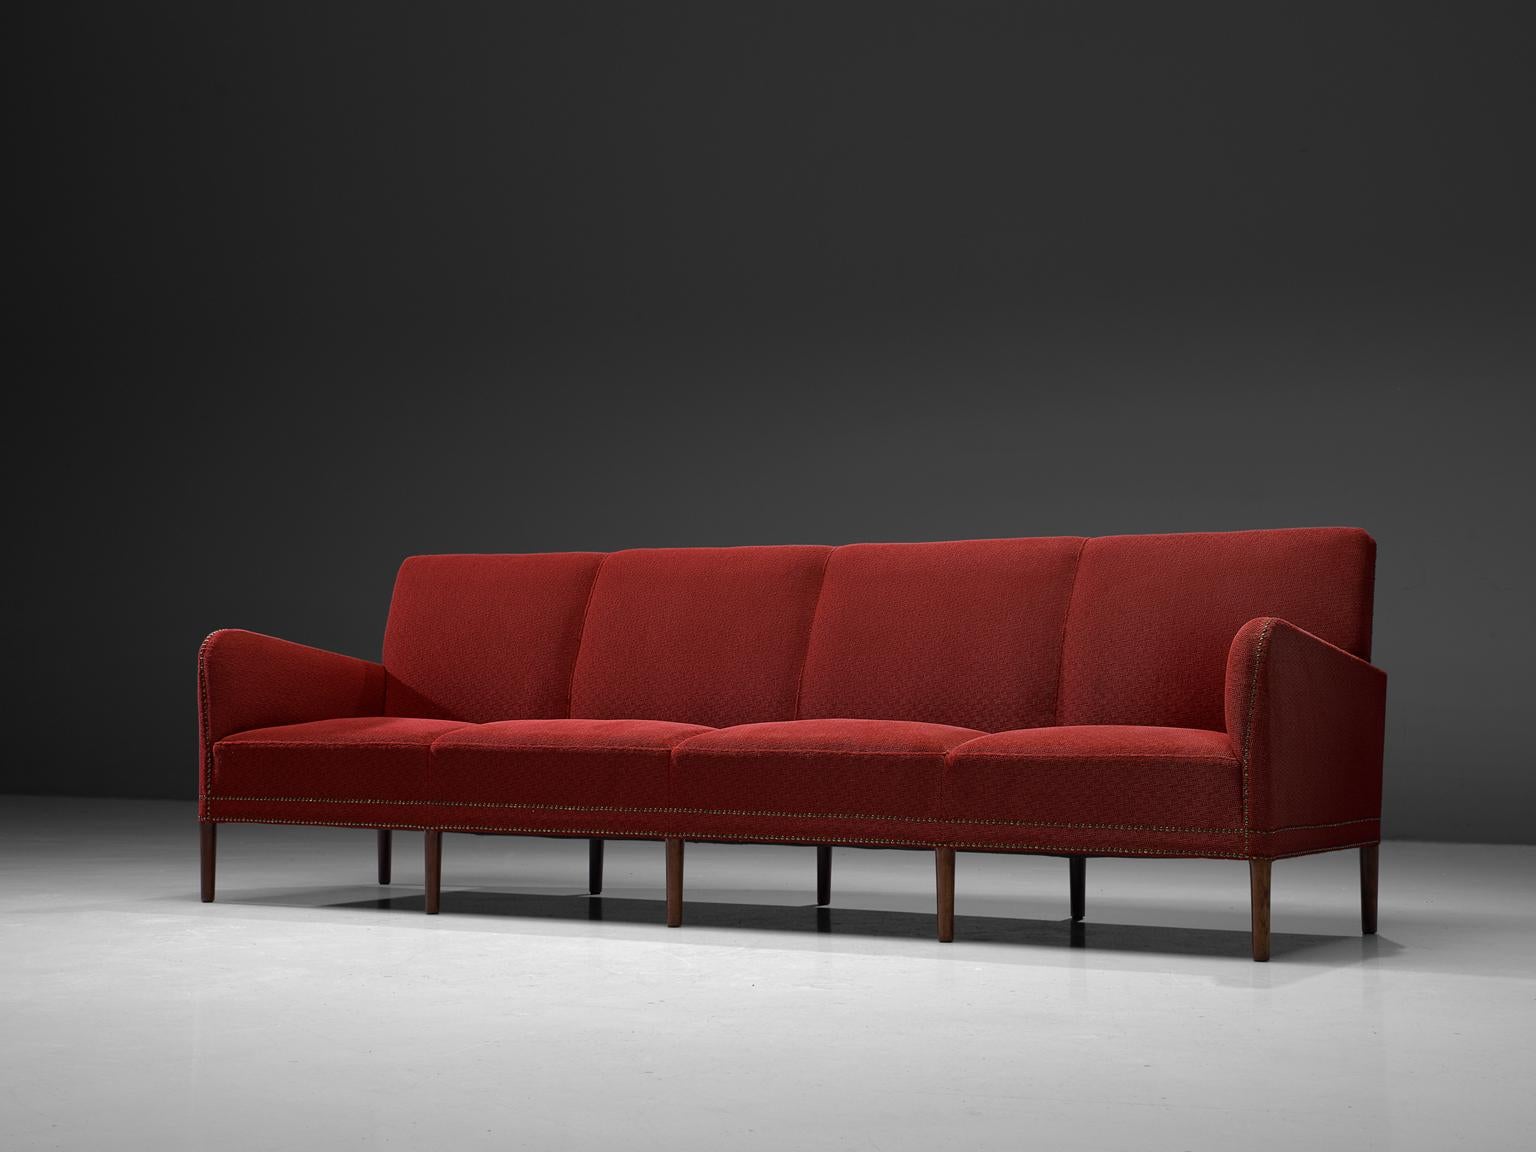 Lars Larsen & Jacob Hermann, four-seat sofa, fabric, mahogany, brass, Denmark, 1940s

This large sofa is made by Danish cabinetmakers Lars Larsen & Jacob Hermann. The sofa is standing on small legs executed in mahogany. The seat is visually